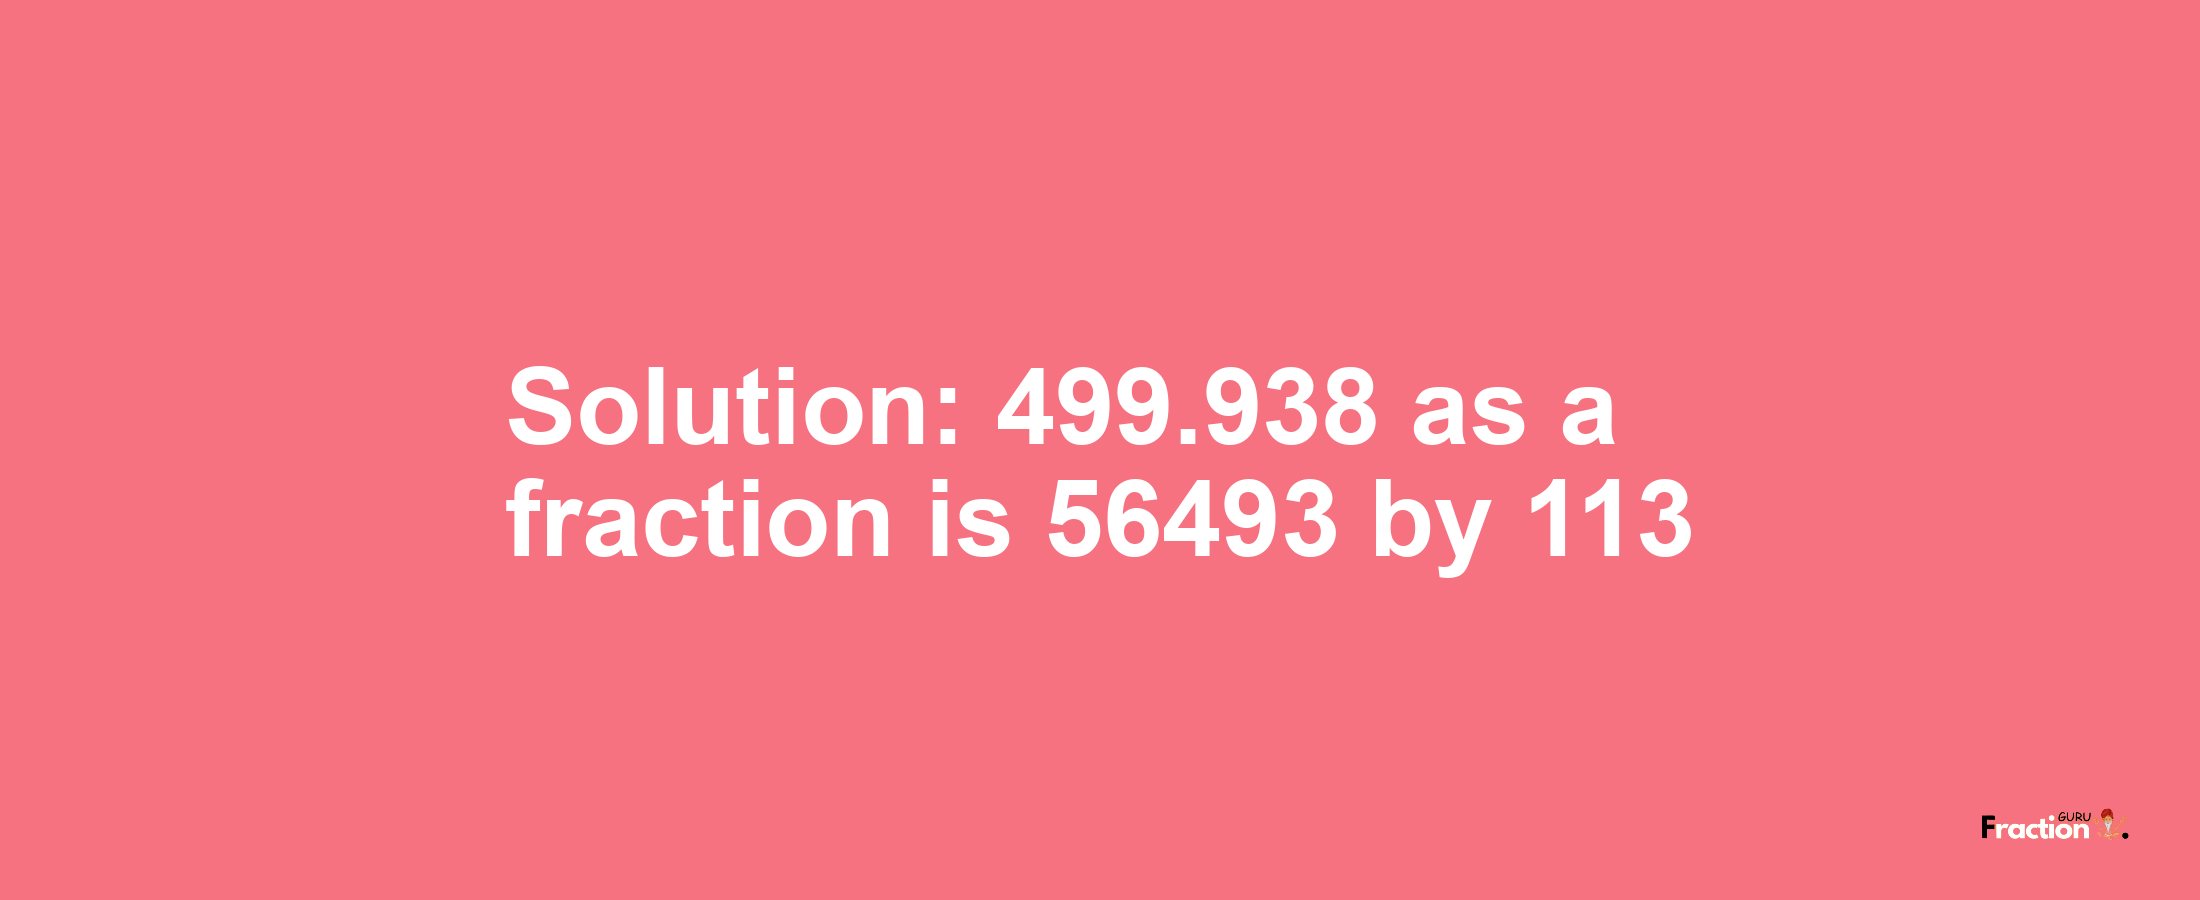 Solution:499.938 as a fraction is 56493/113